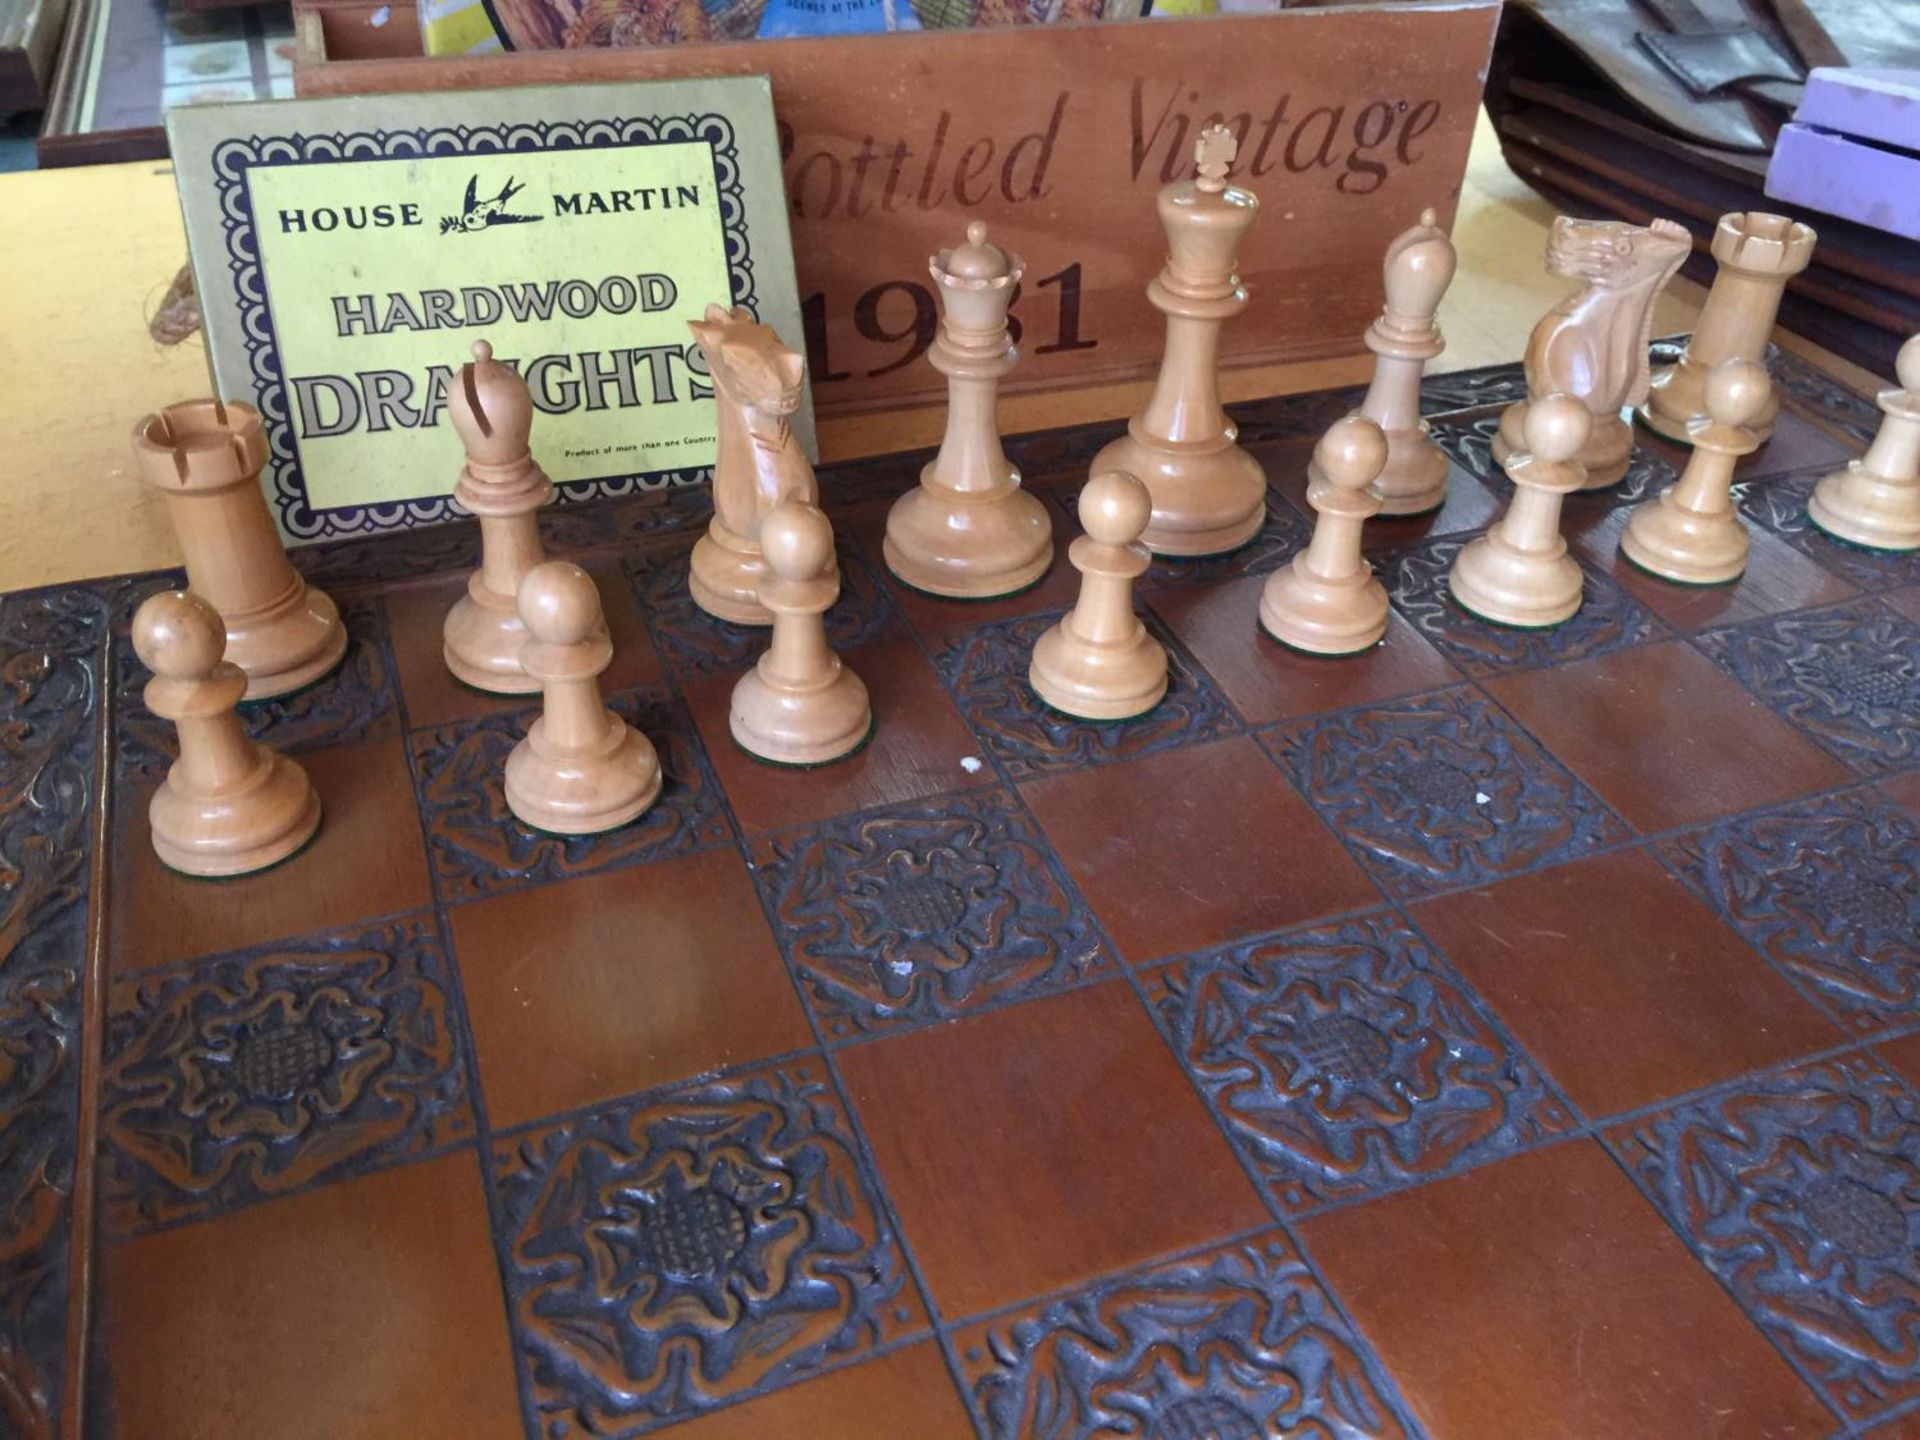 A WOODEN CARVED CHESSBOARD COMPLETE WITH THE PIECES PLUS DRAUGHTS AND A VINTAGE JIGSAW - Image 3 of 4